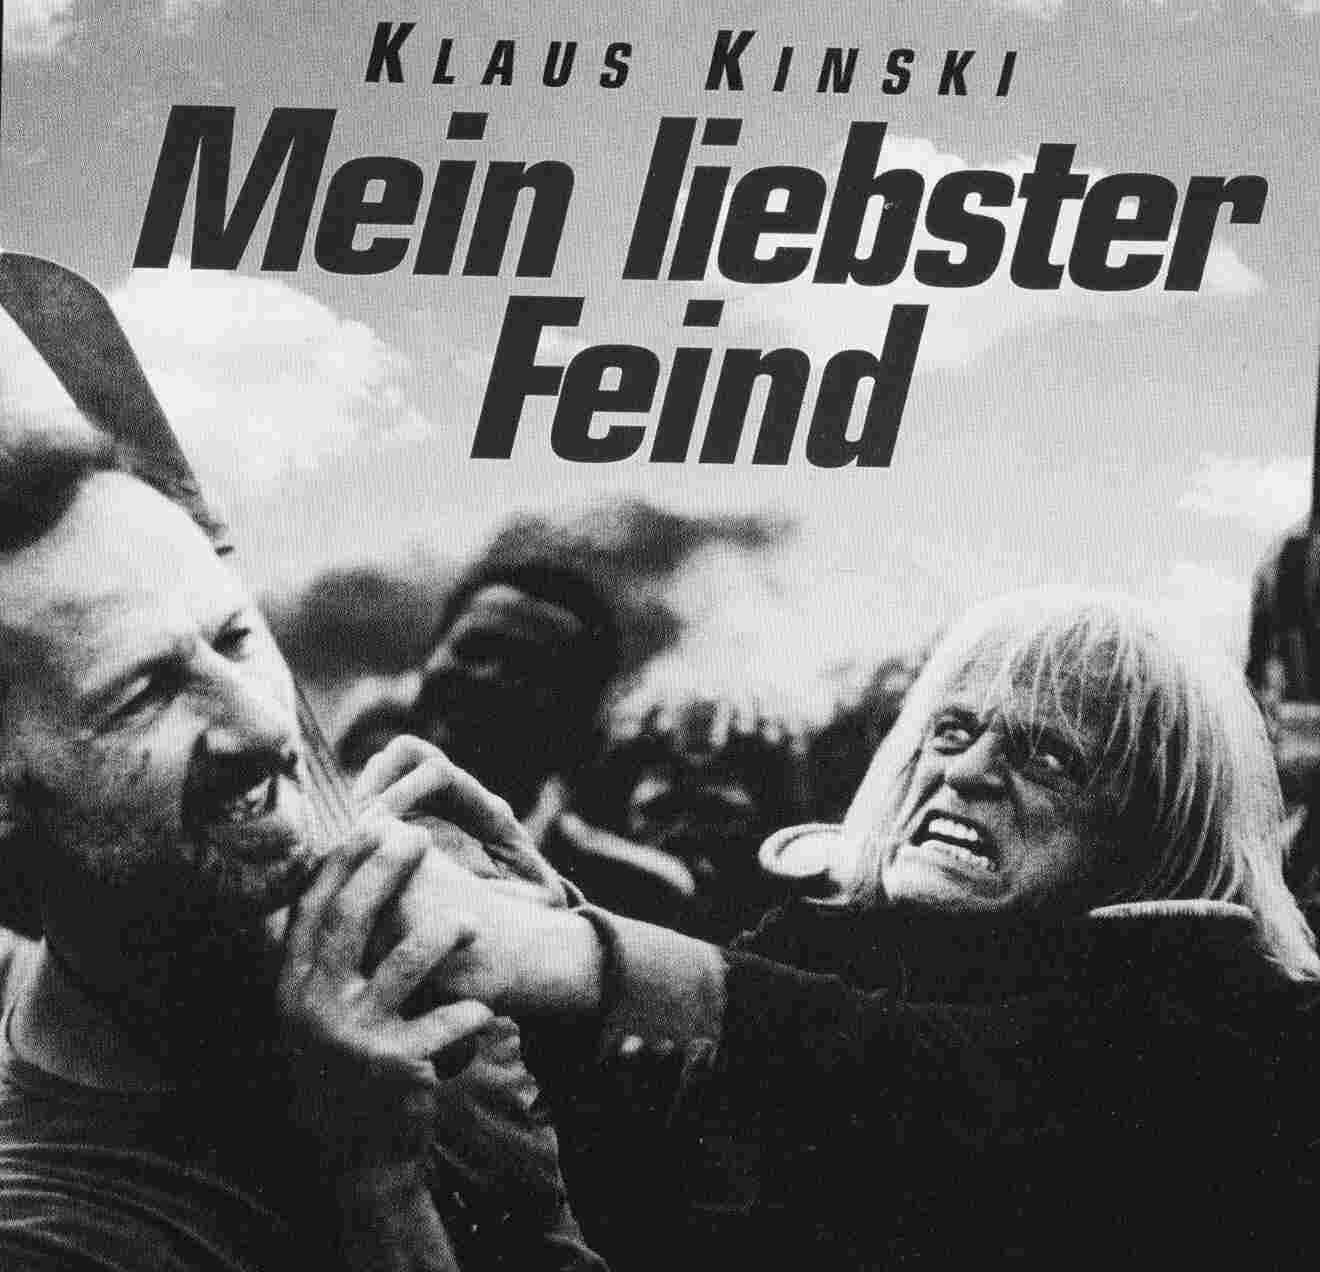 Director and actor who have both influenced Armourae. Werer Herzog's portrayal of the social and psychological condition; and requiring actors to improvise dialogue. And Klaus Kinski's expressionistic uninhibited acting. Here they are in ty